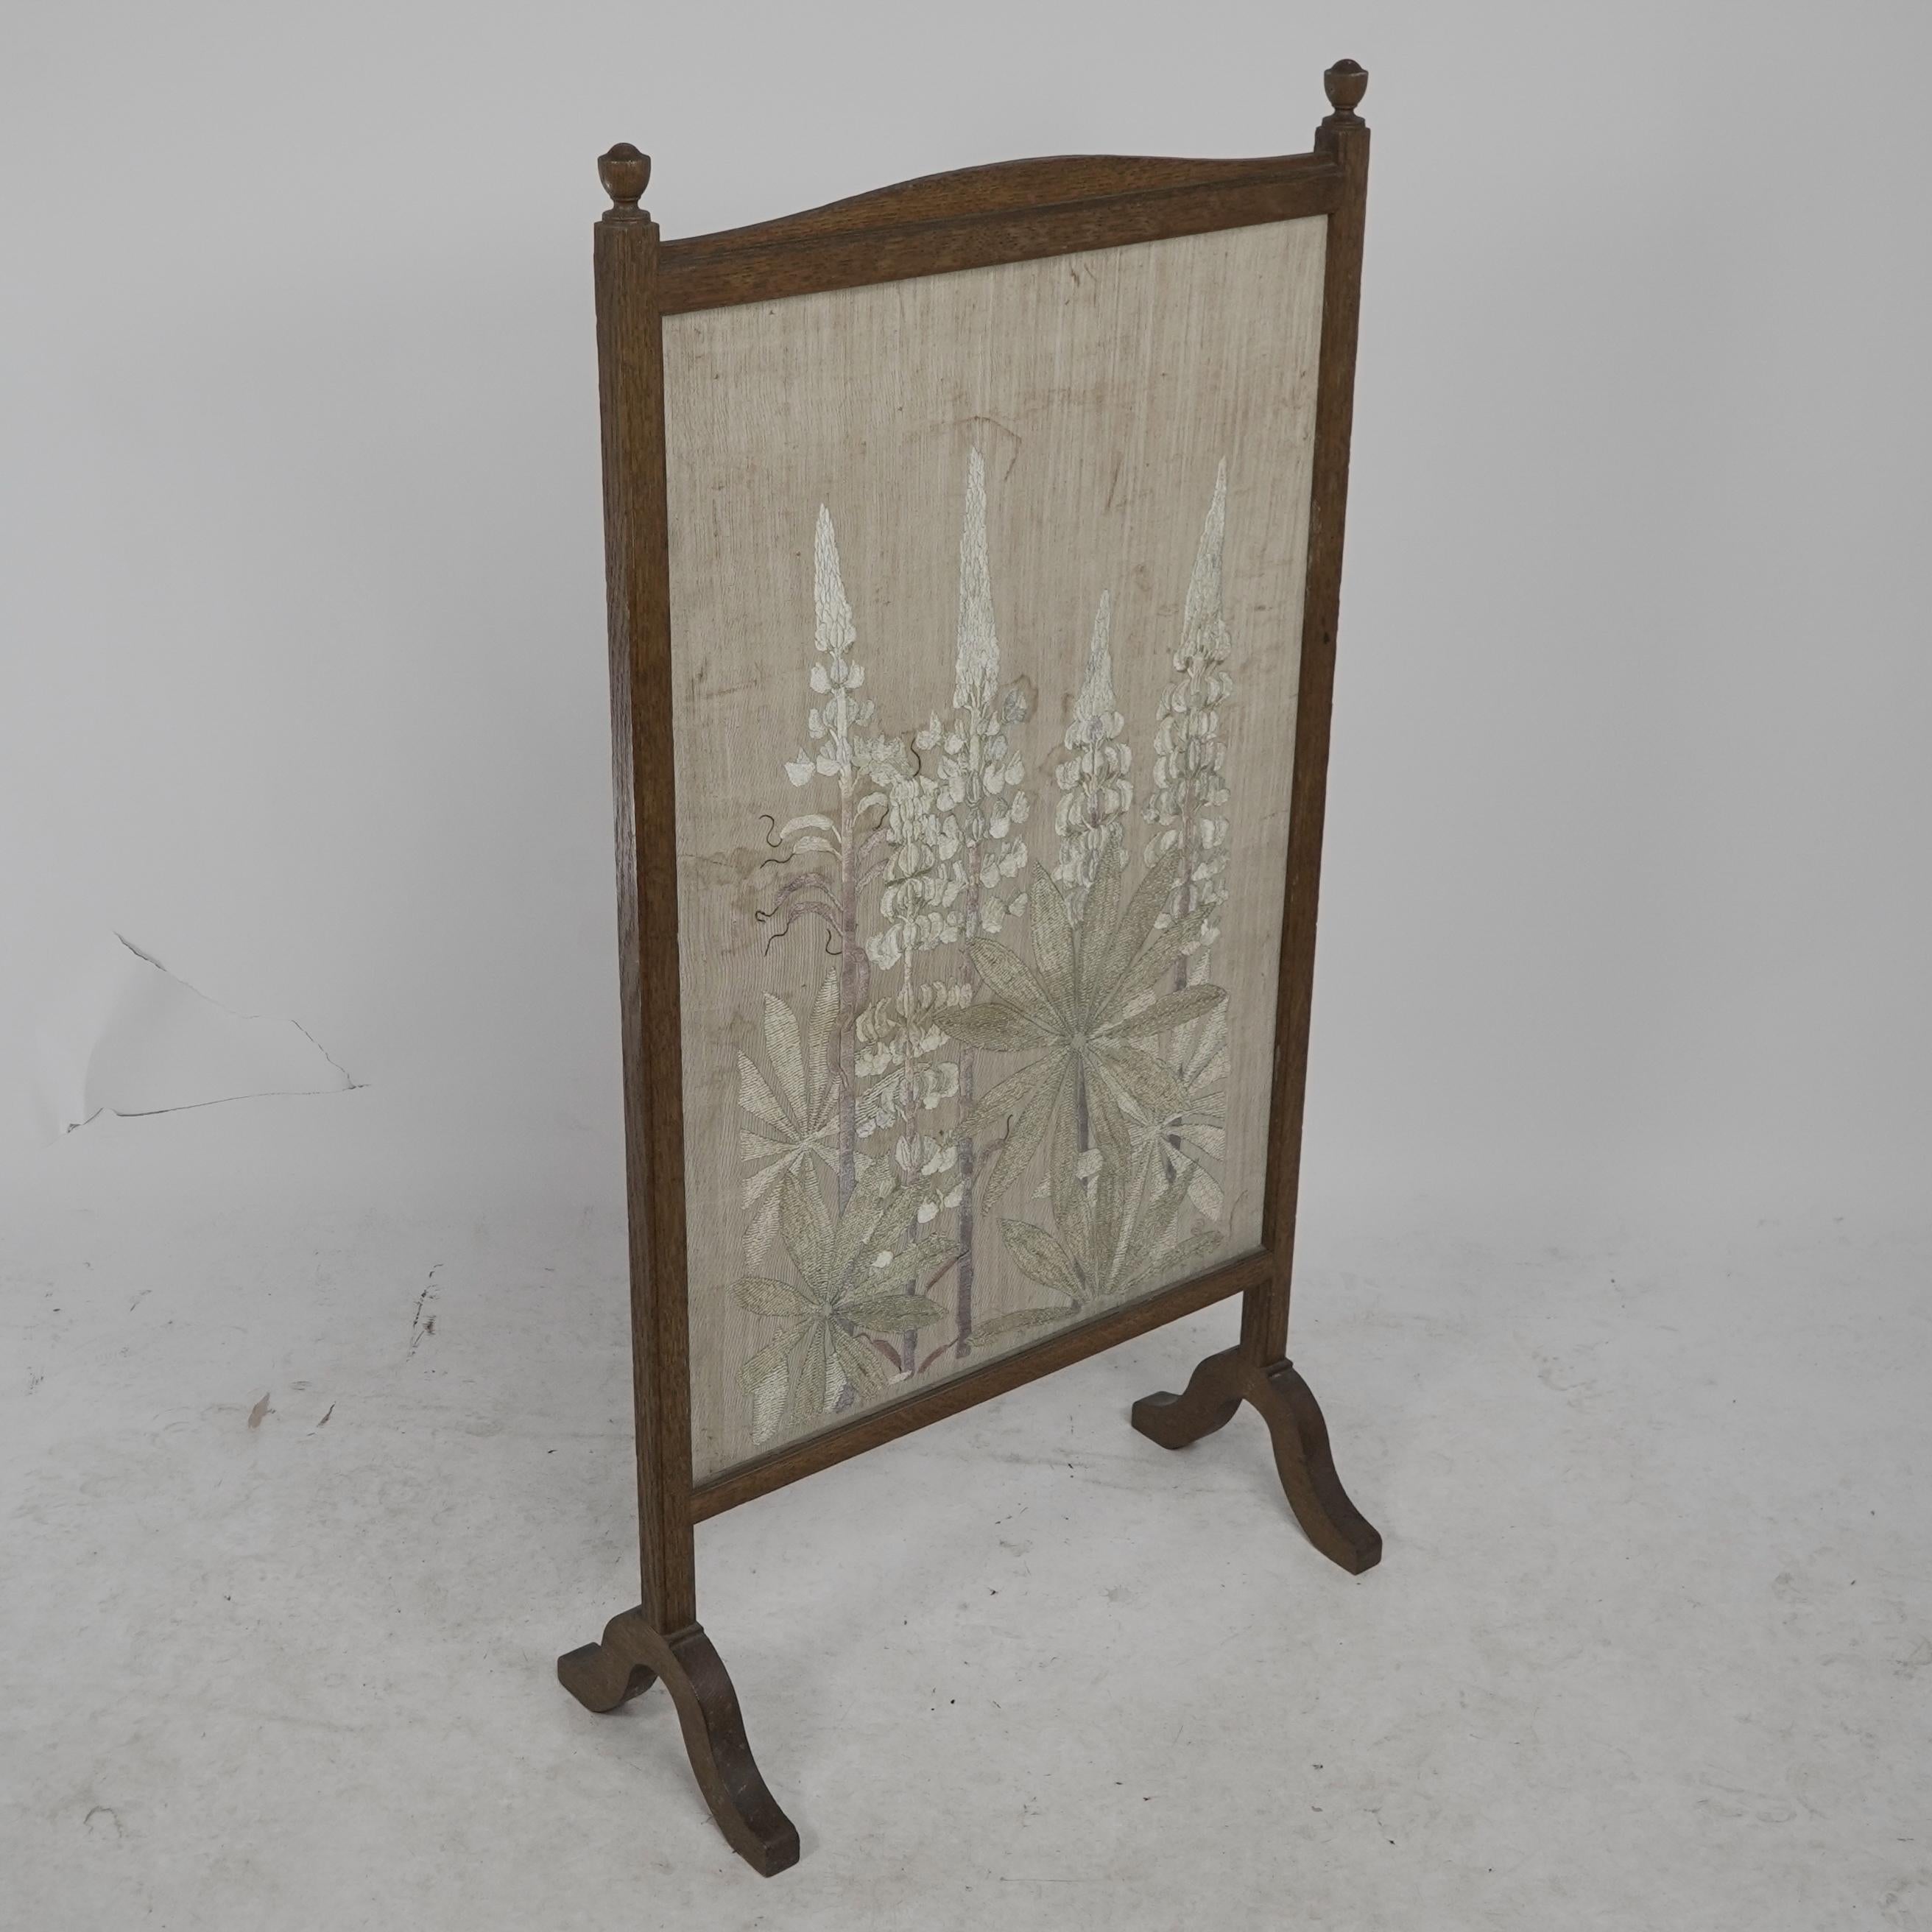 Selwyn Image for the Century Guild. A rare Arts and Crafts oak and floral embroidery fire screen decorated with stylized foxgloves. 
Needlework signature CG to the lower right-hand corner.
